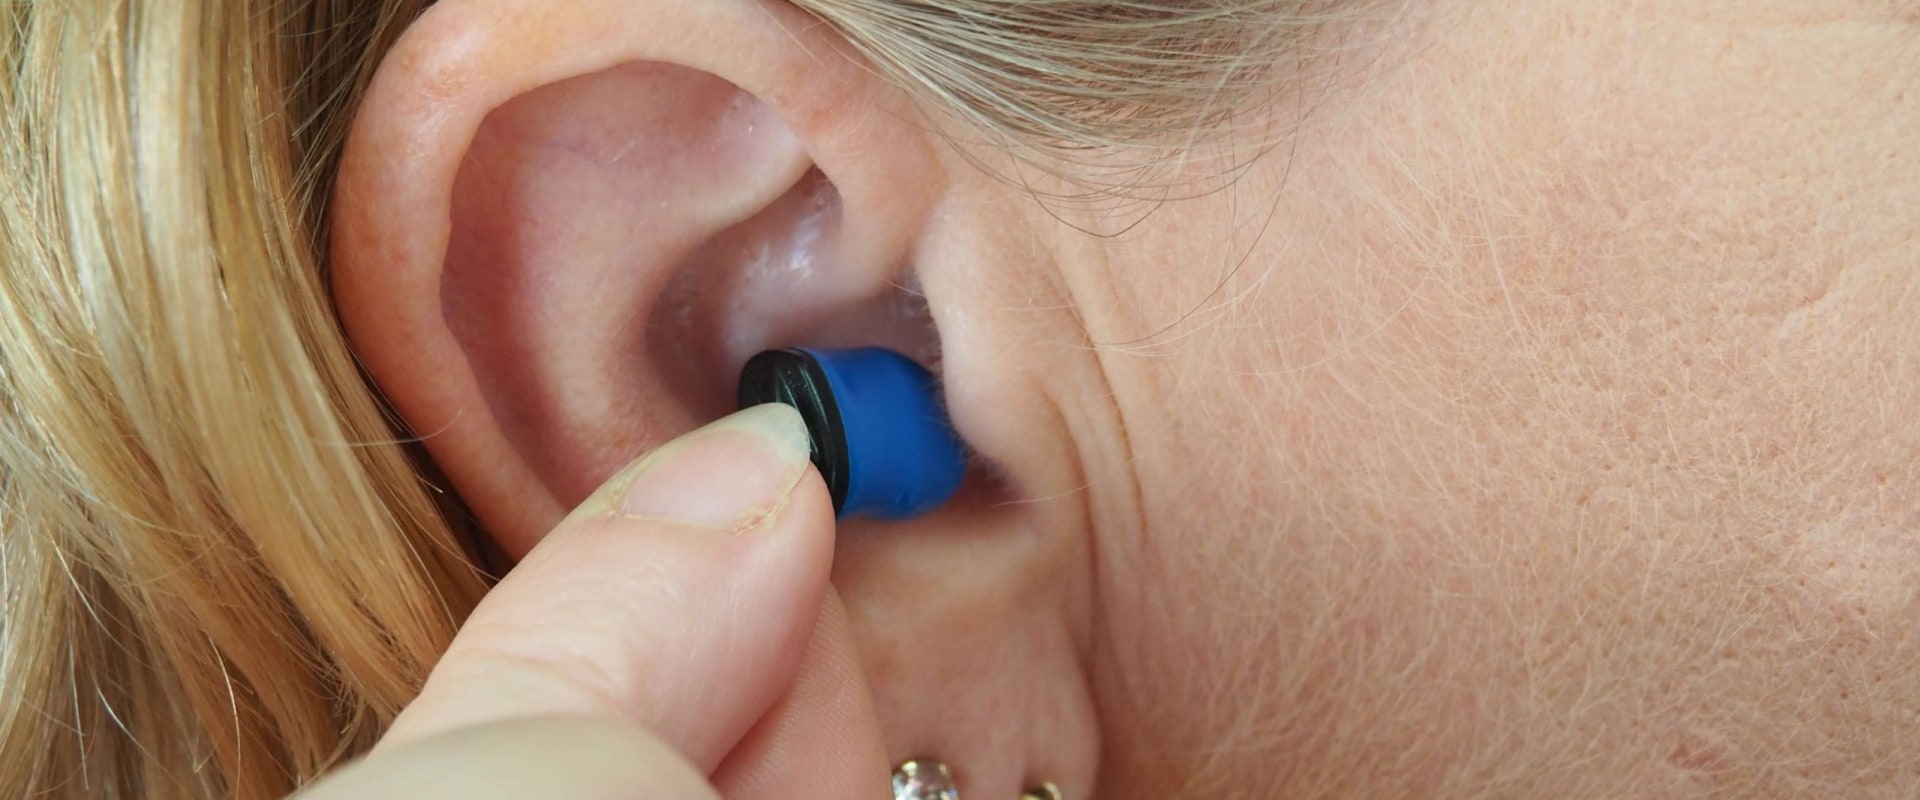 What effect do hearing aids have on tinnitus?